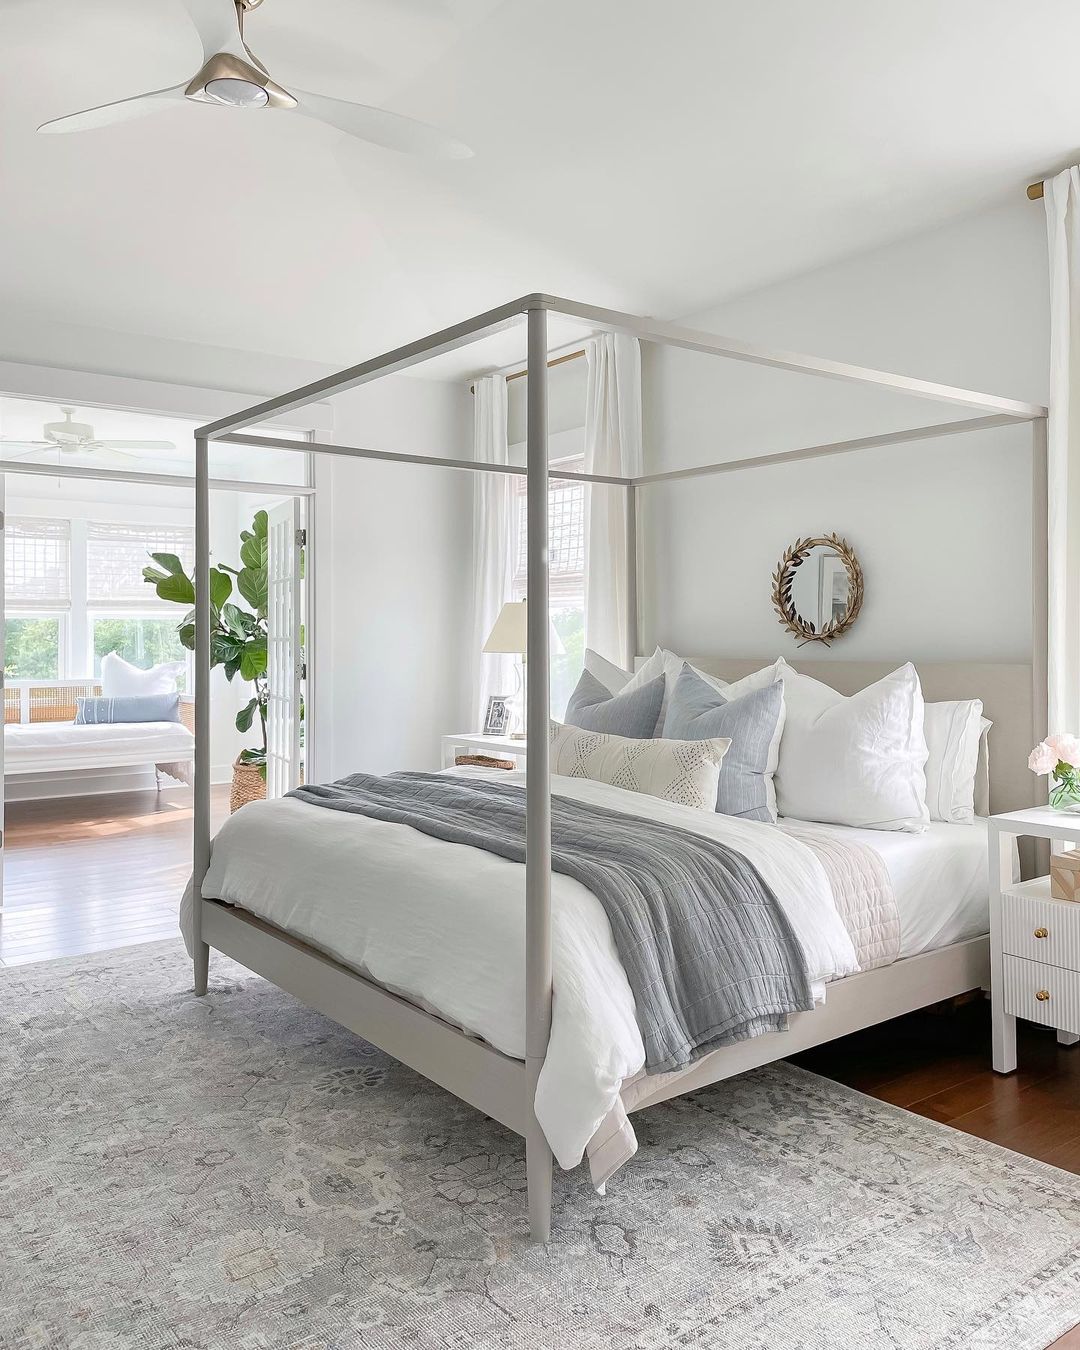 Opt for a Breezy Four-Poster Bed with Soft Linens